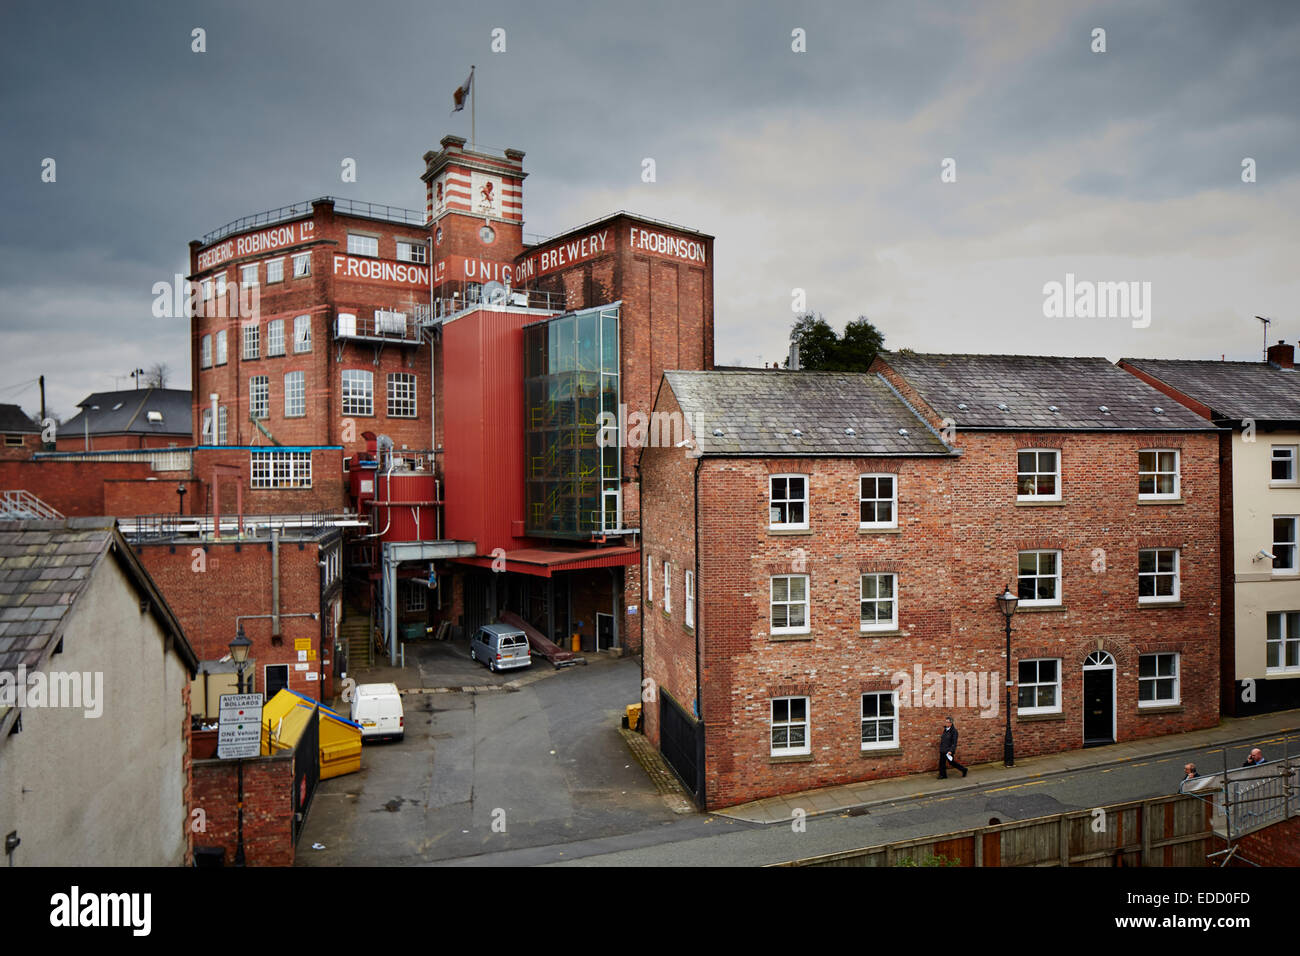 Stockport town centre Lower Hillgate, F Robinsons brewery a family-run, regional brewery founded in 1859 by Frederic Robinson Stock Photo